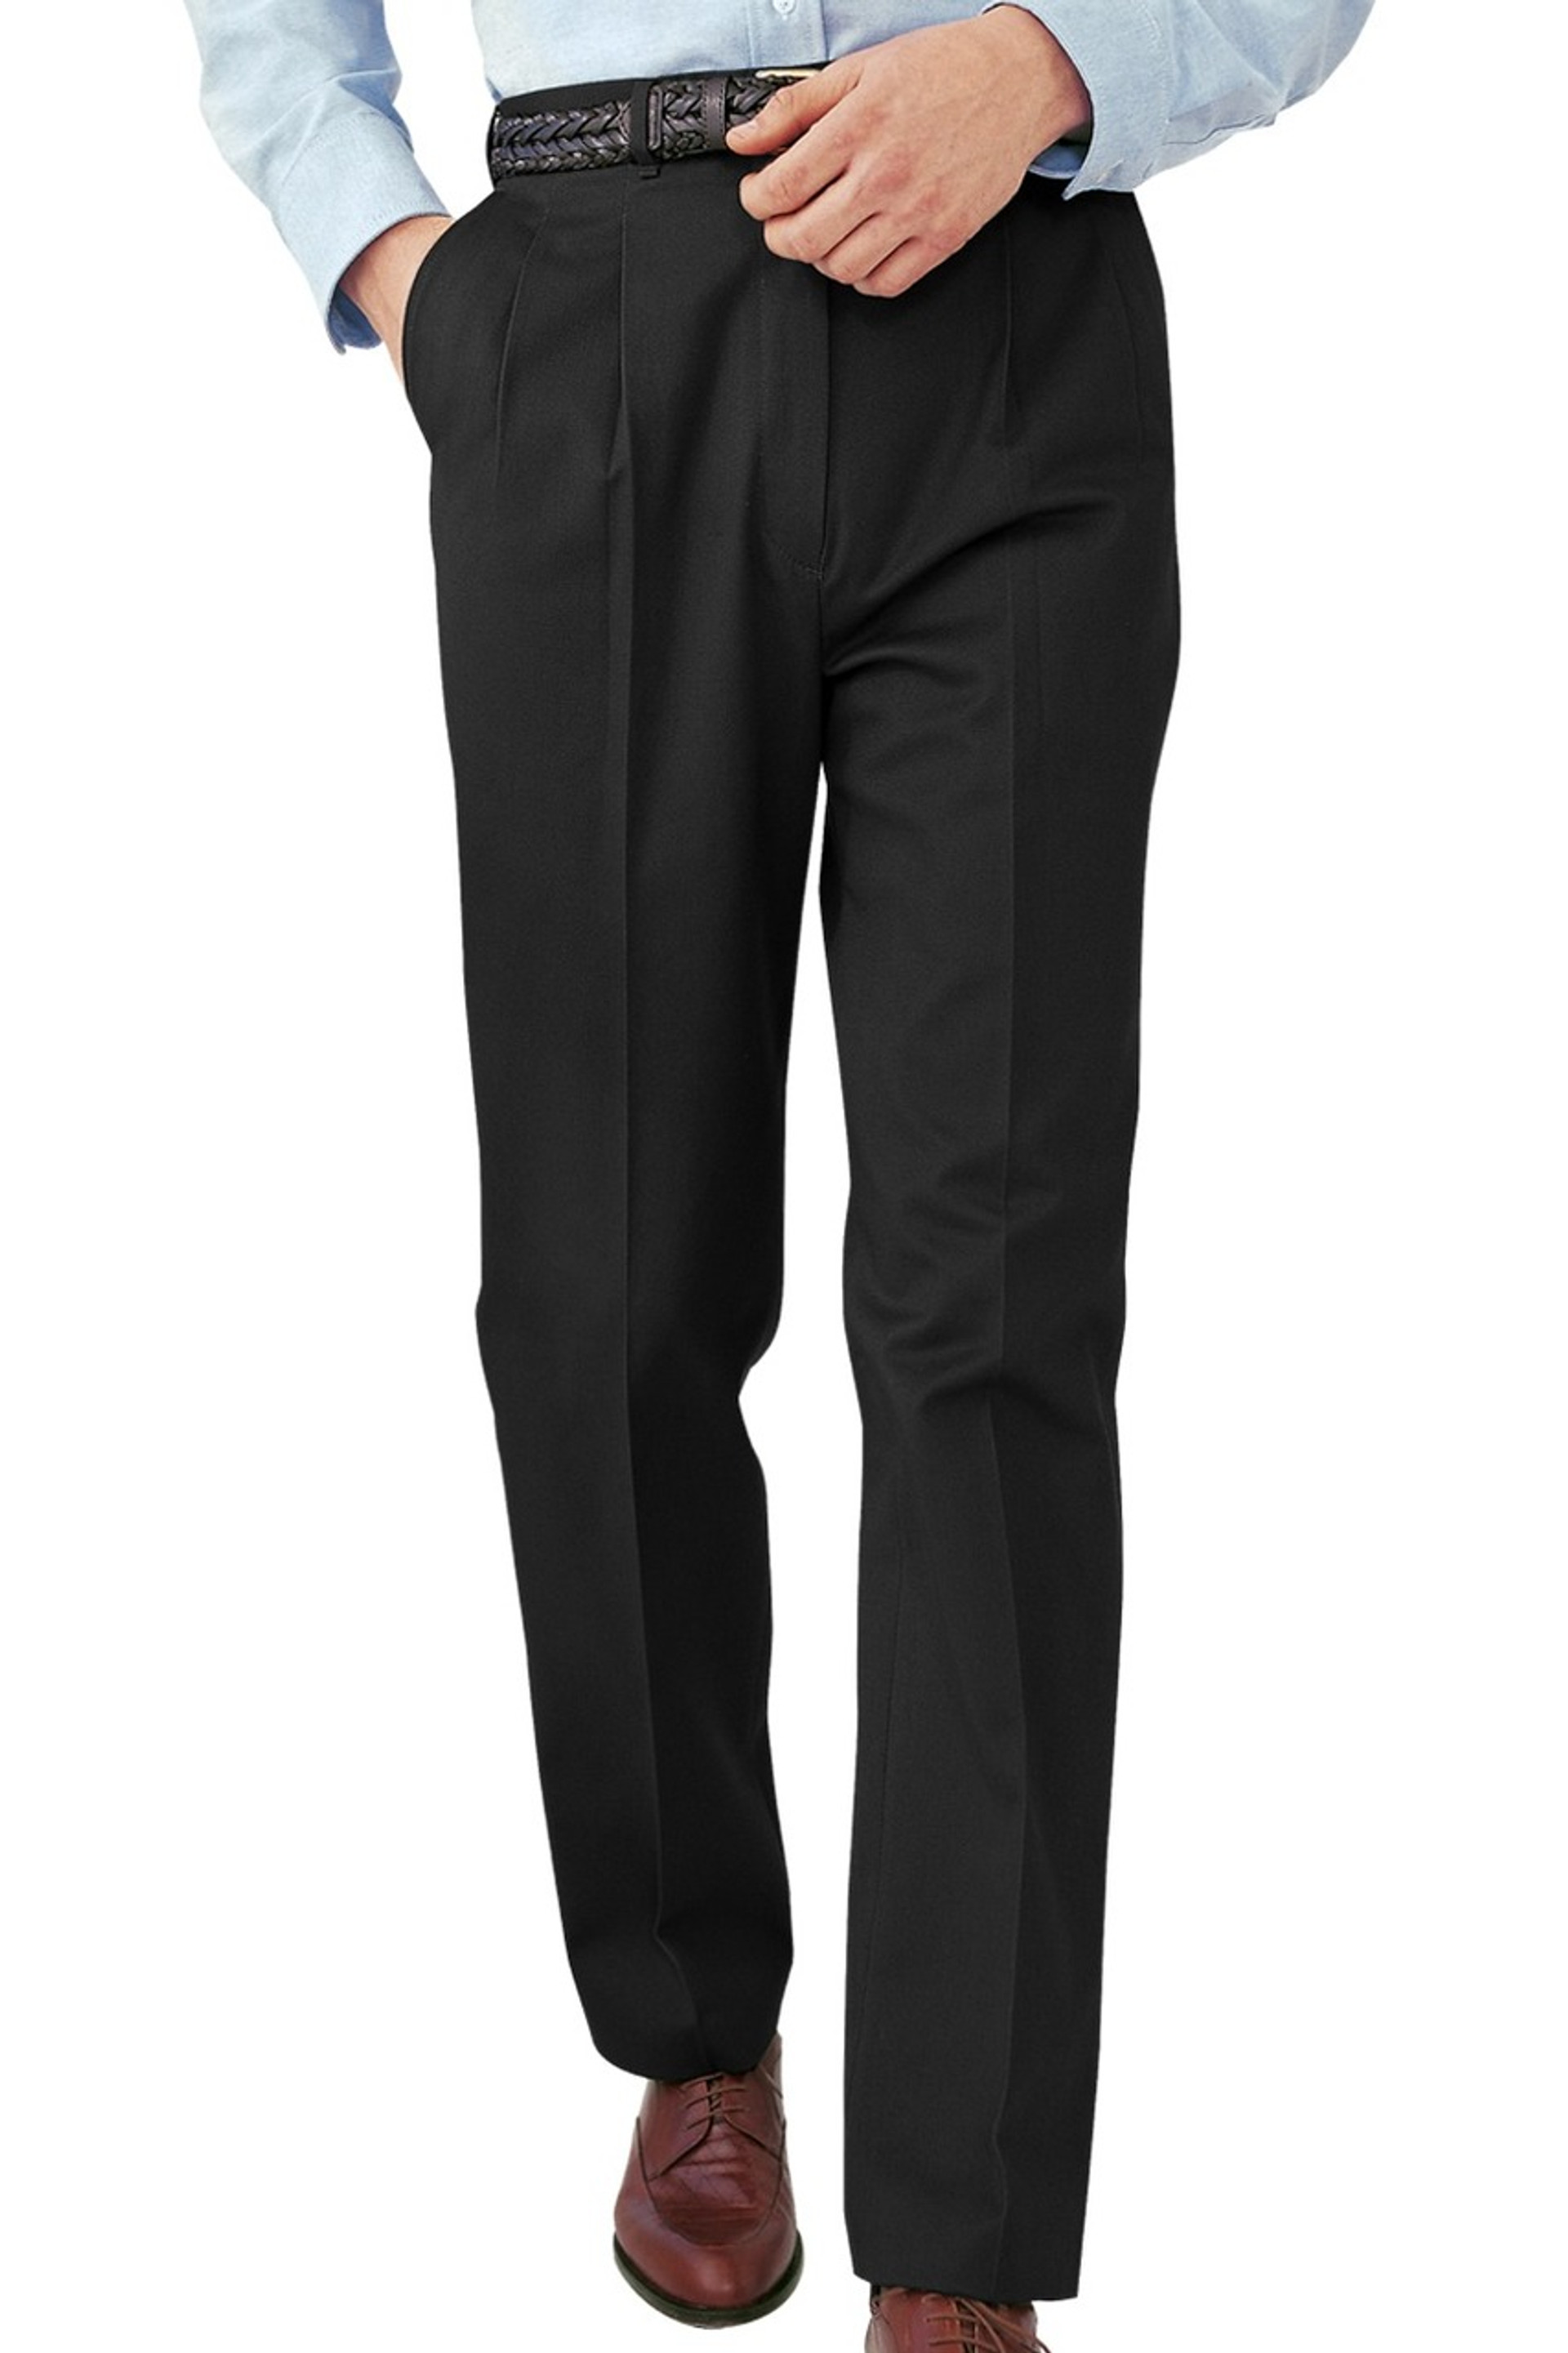 Men's all cotton pleated front work pants in black